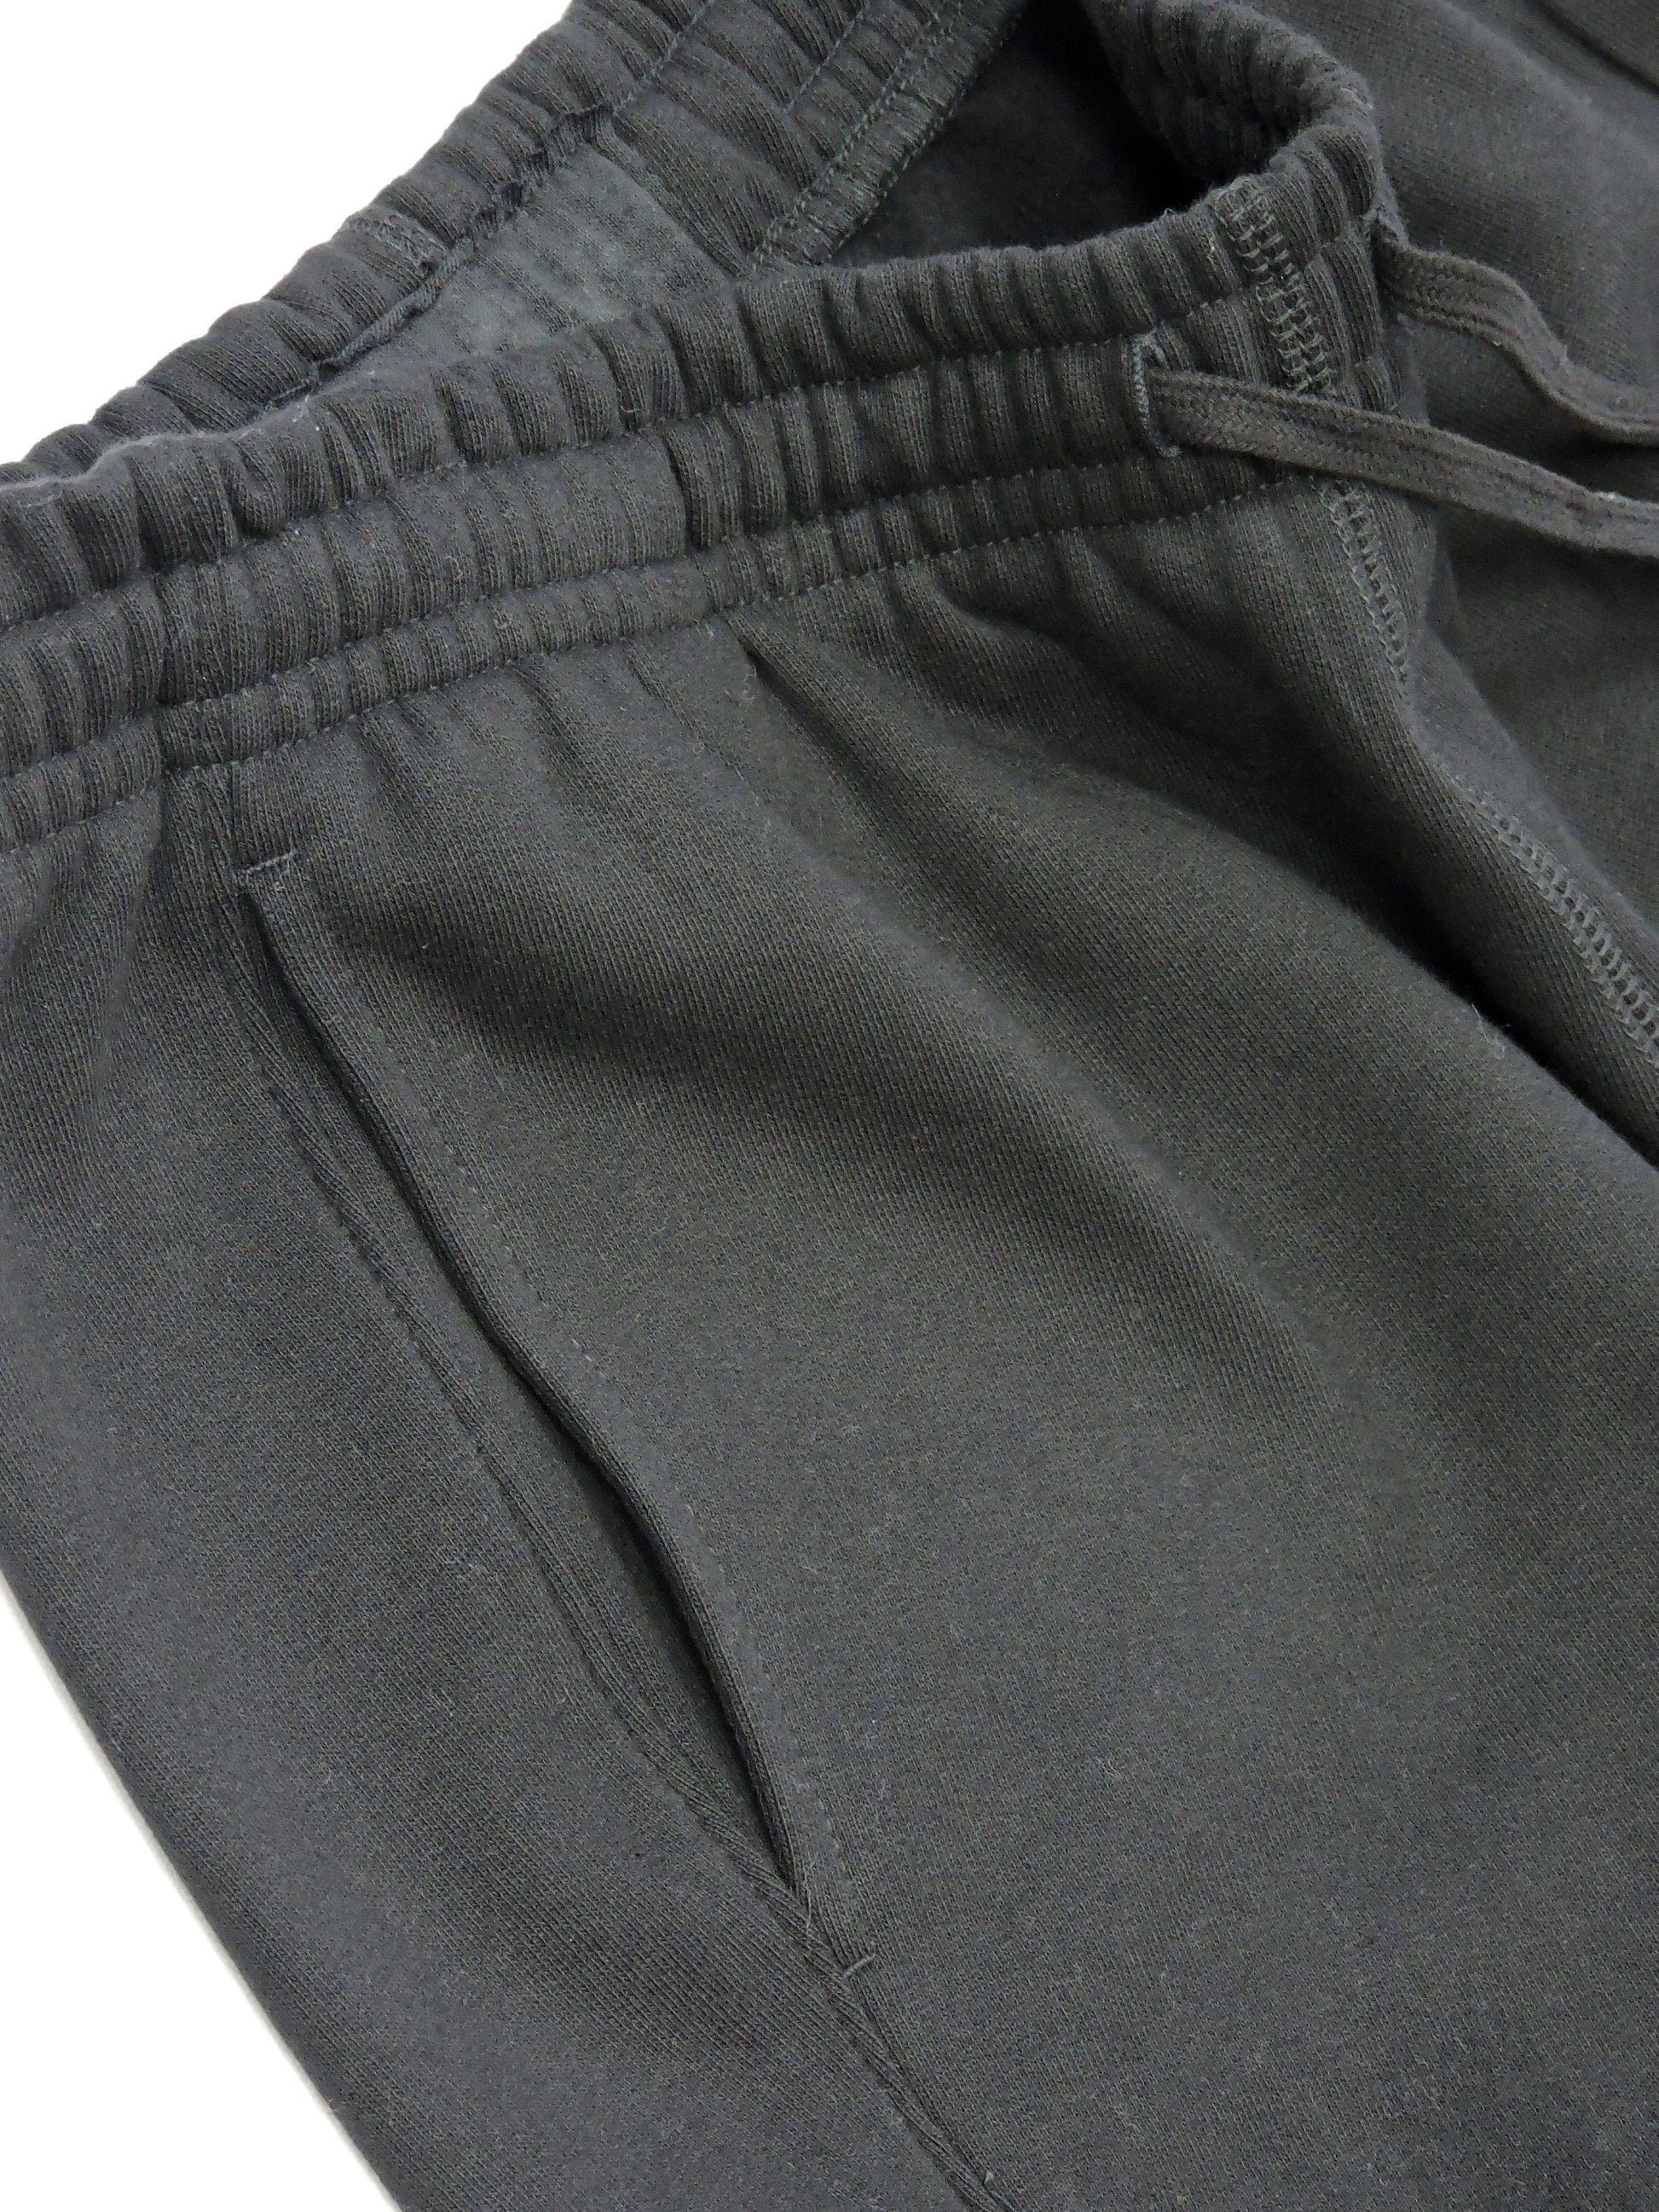 Close up of fleece material used in black jogger